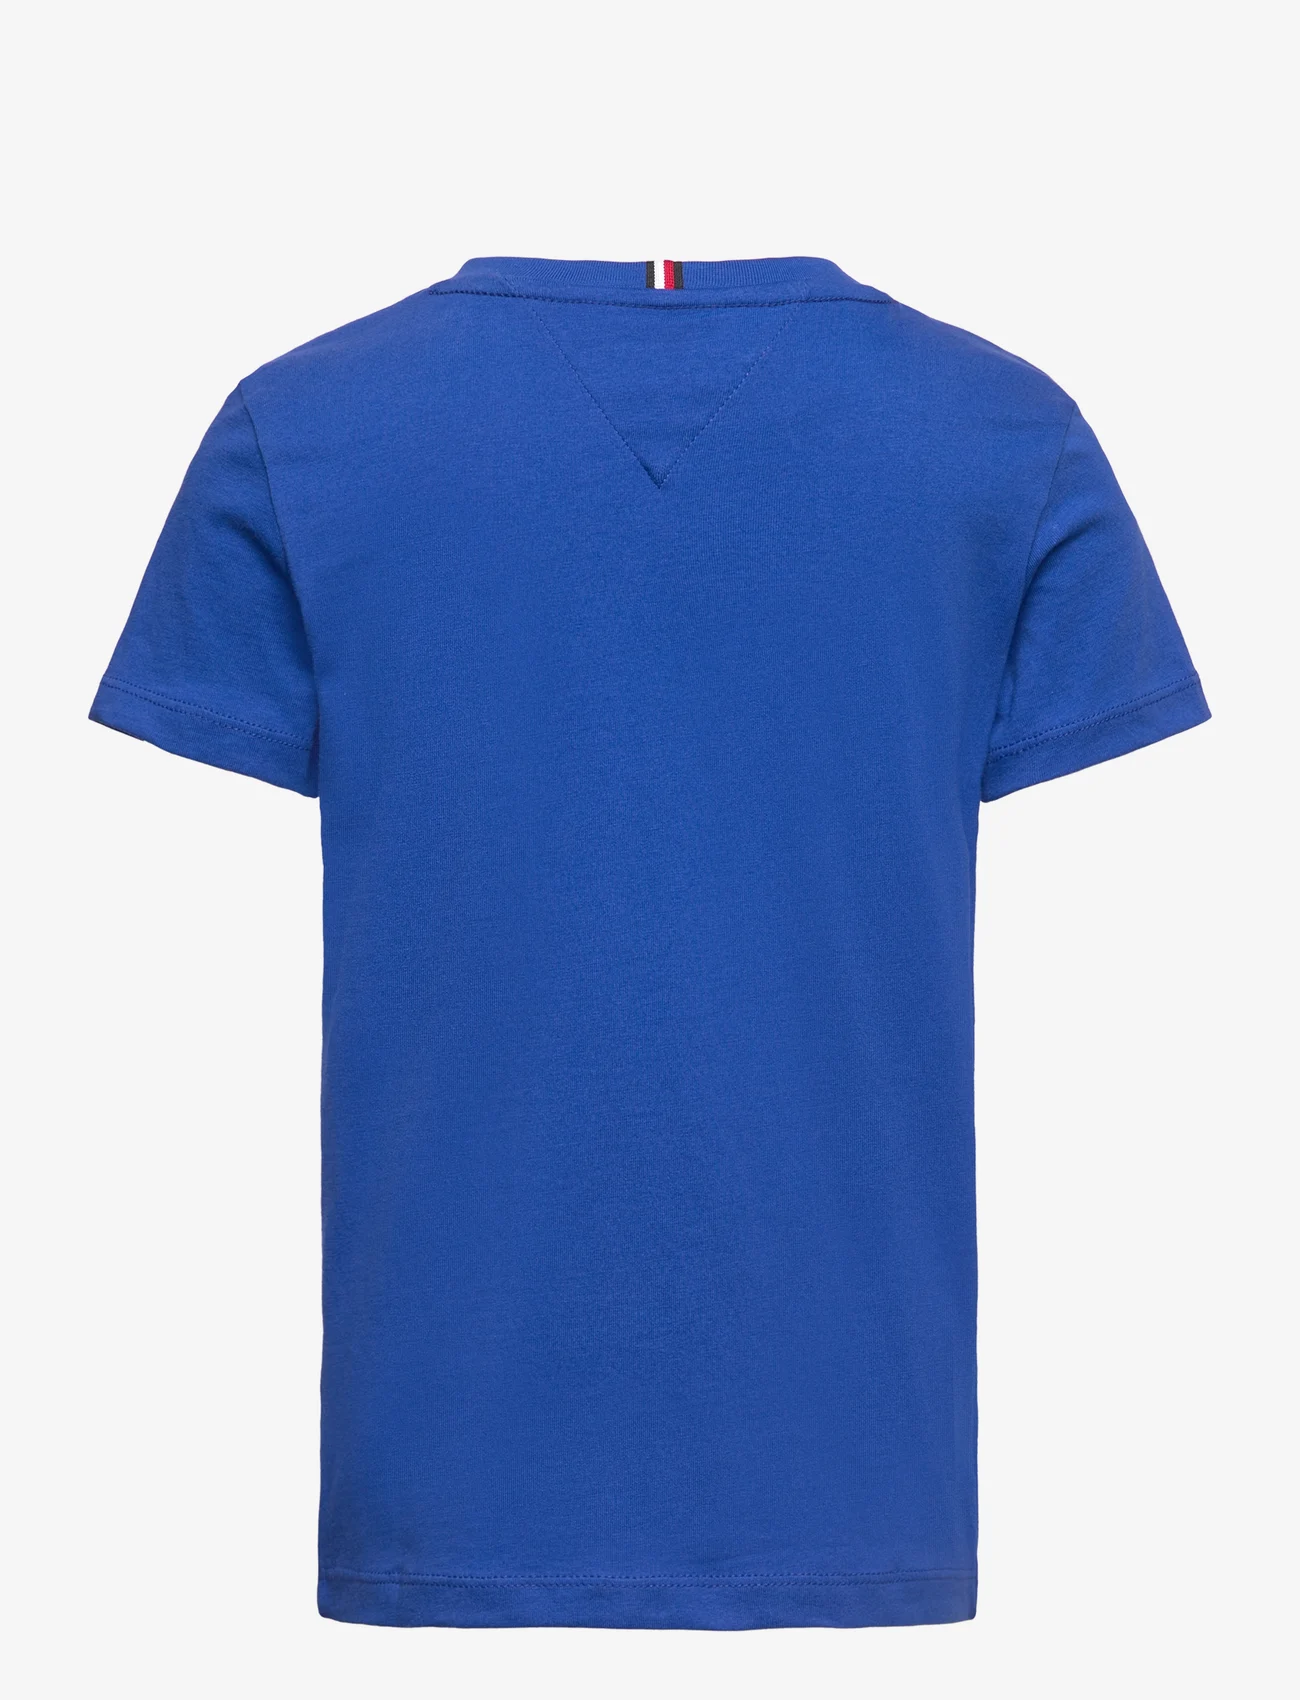 Tommy Hilfiger - TH LOGO TEE S/S - lyhythihaiset t-paidat - ultra blue - 1